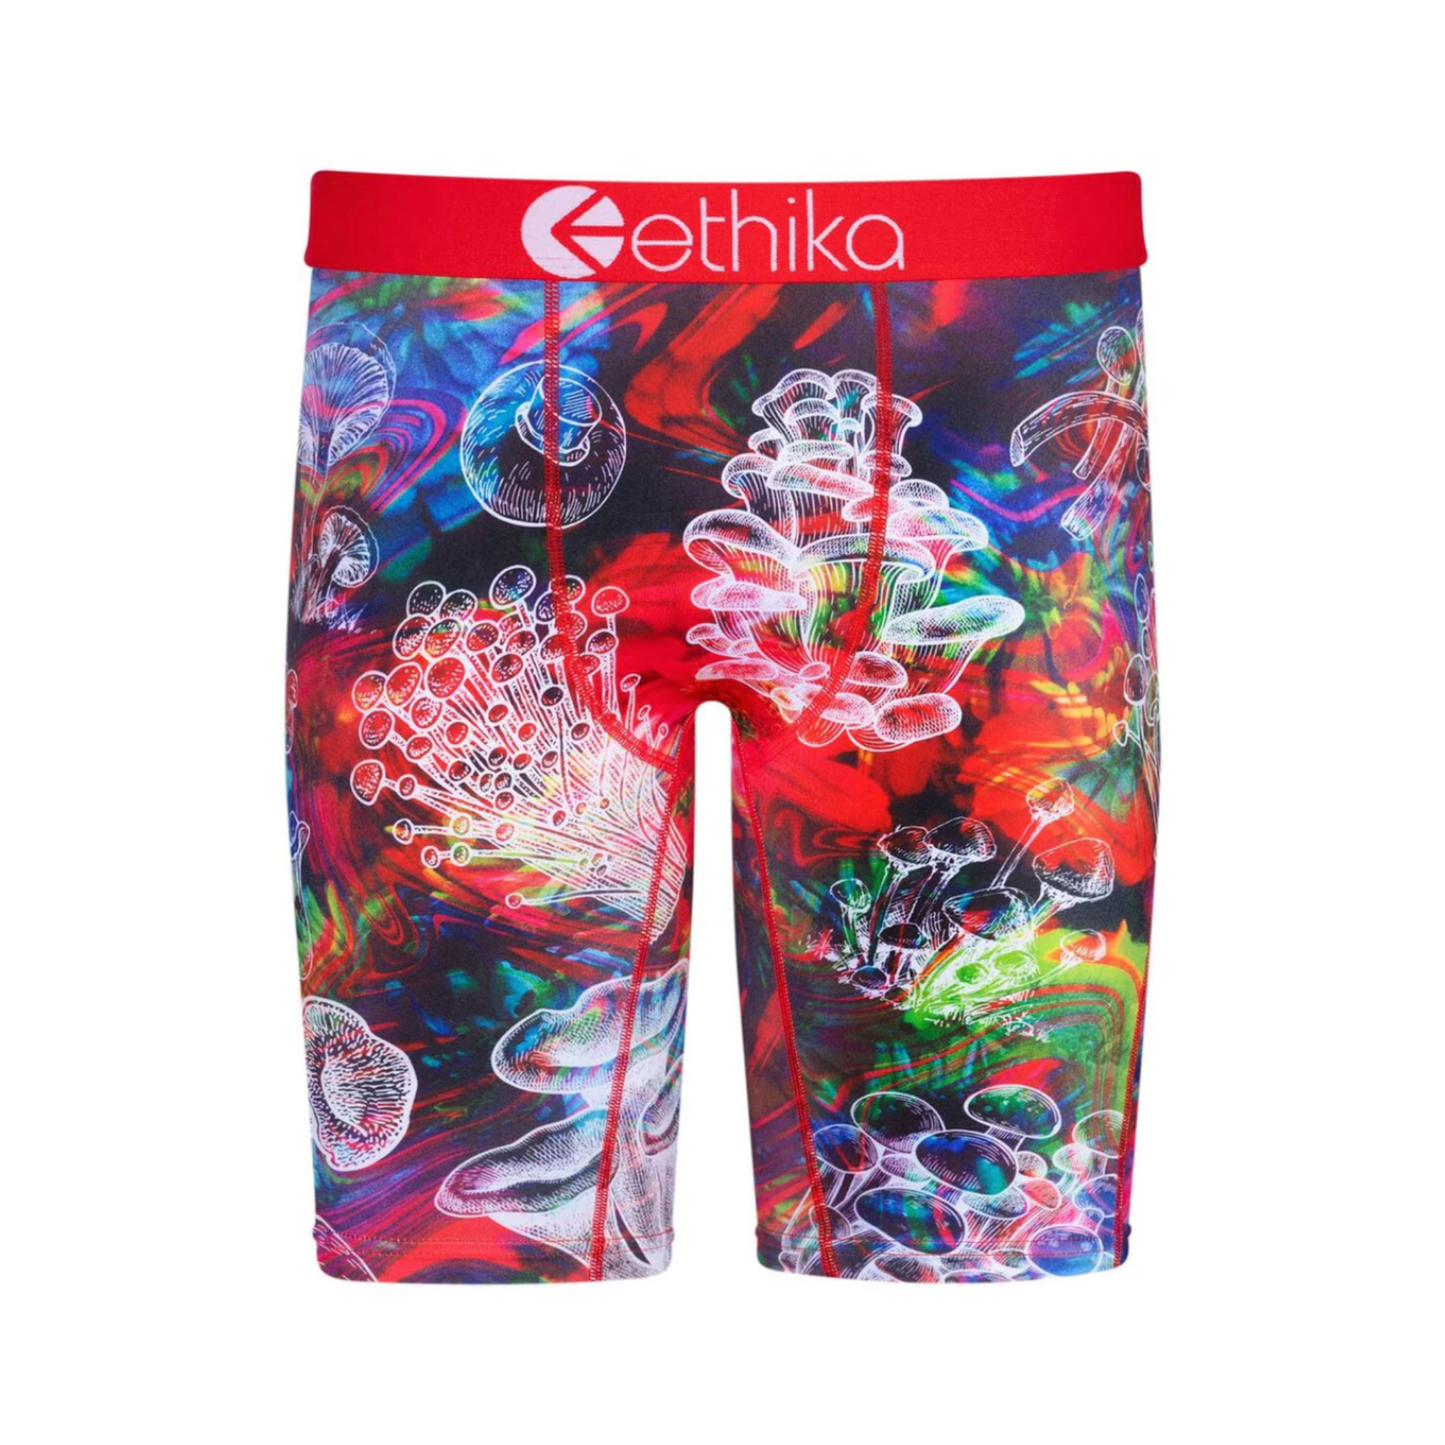 ETHIKA 'LOST TIME PRESIDENTIAL'